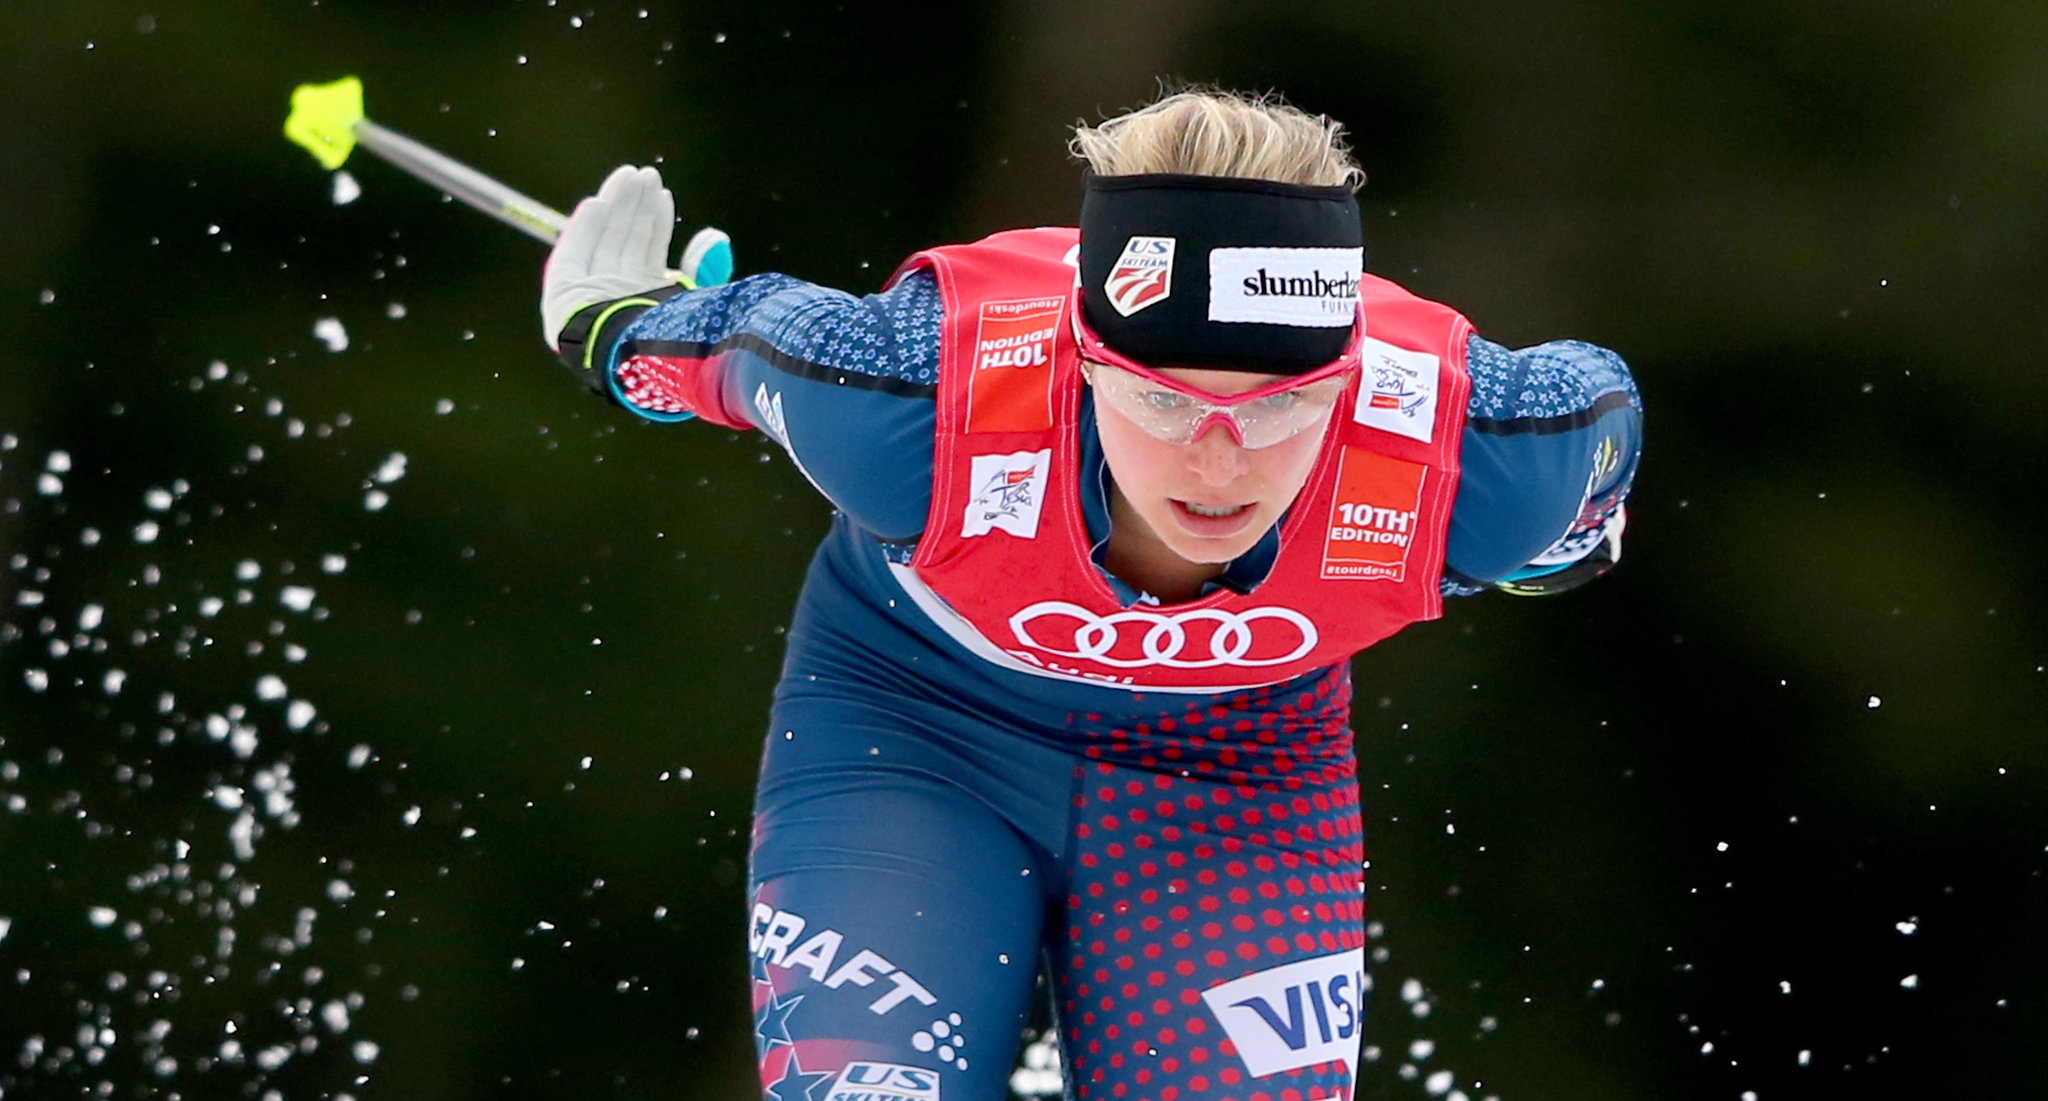 The American cross-country skier Jessie Diggins competing in 2016. “Saving winter is something I believe in,” she said.CreditAlexander Hassenstein/Bongarts, via Getty Images